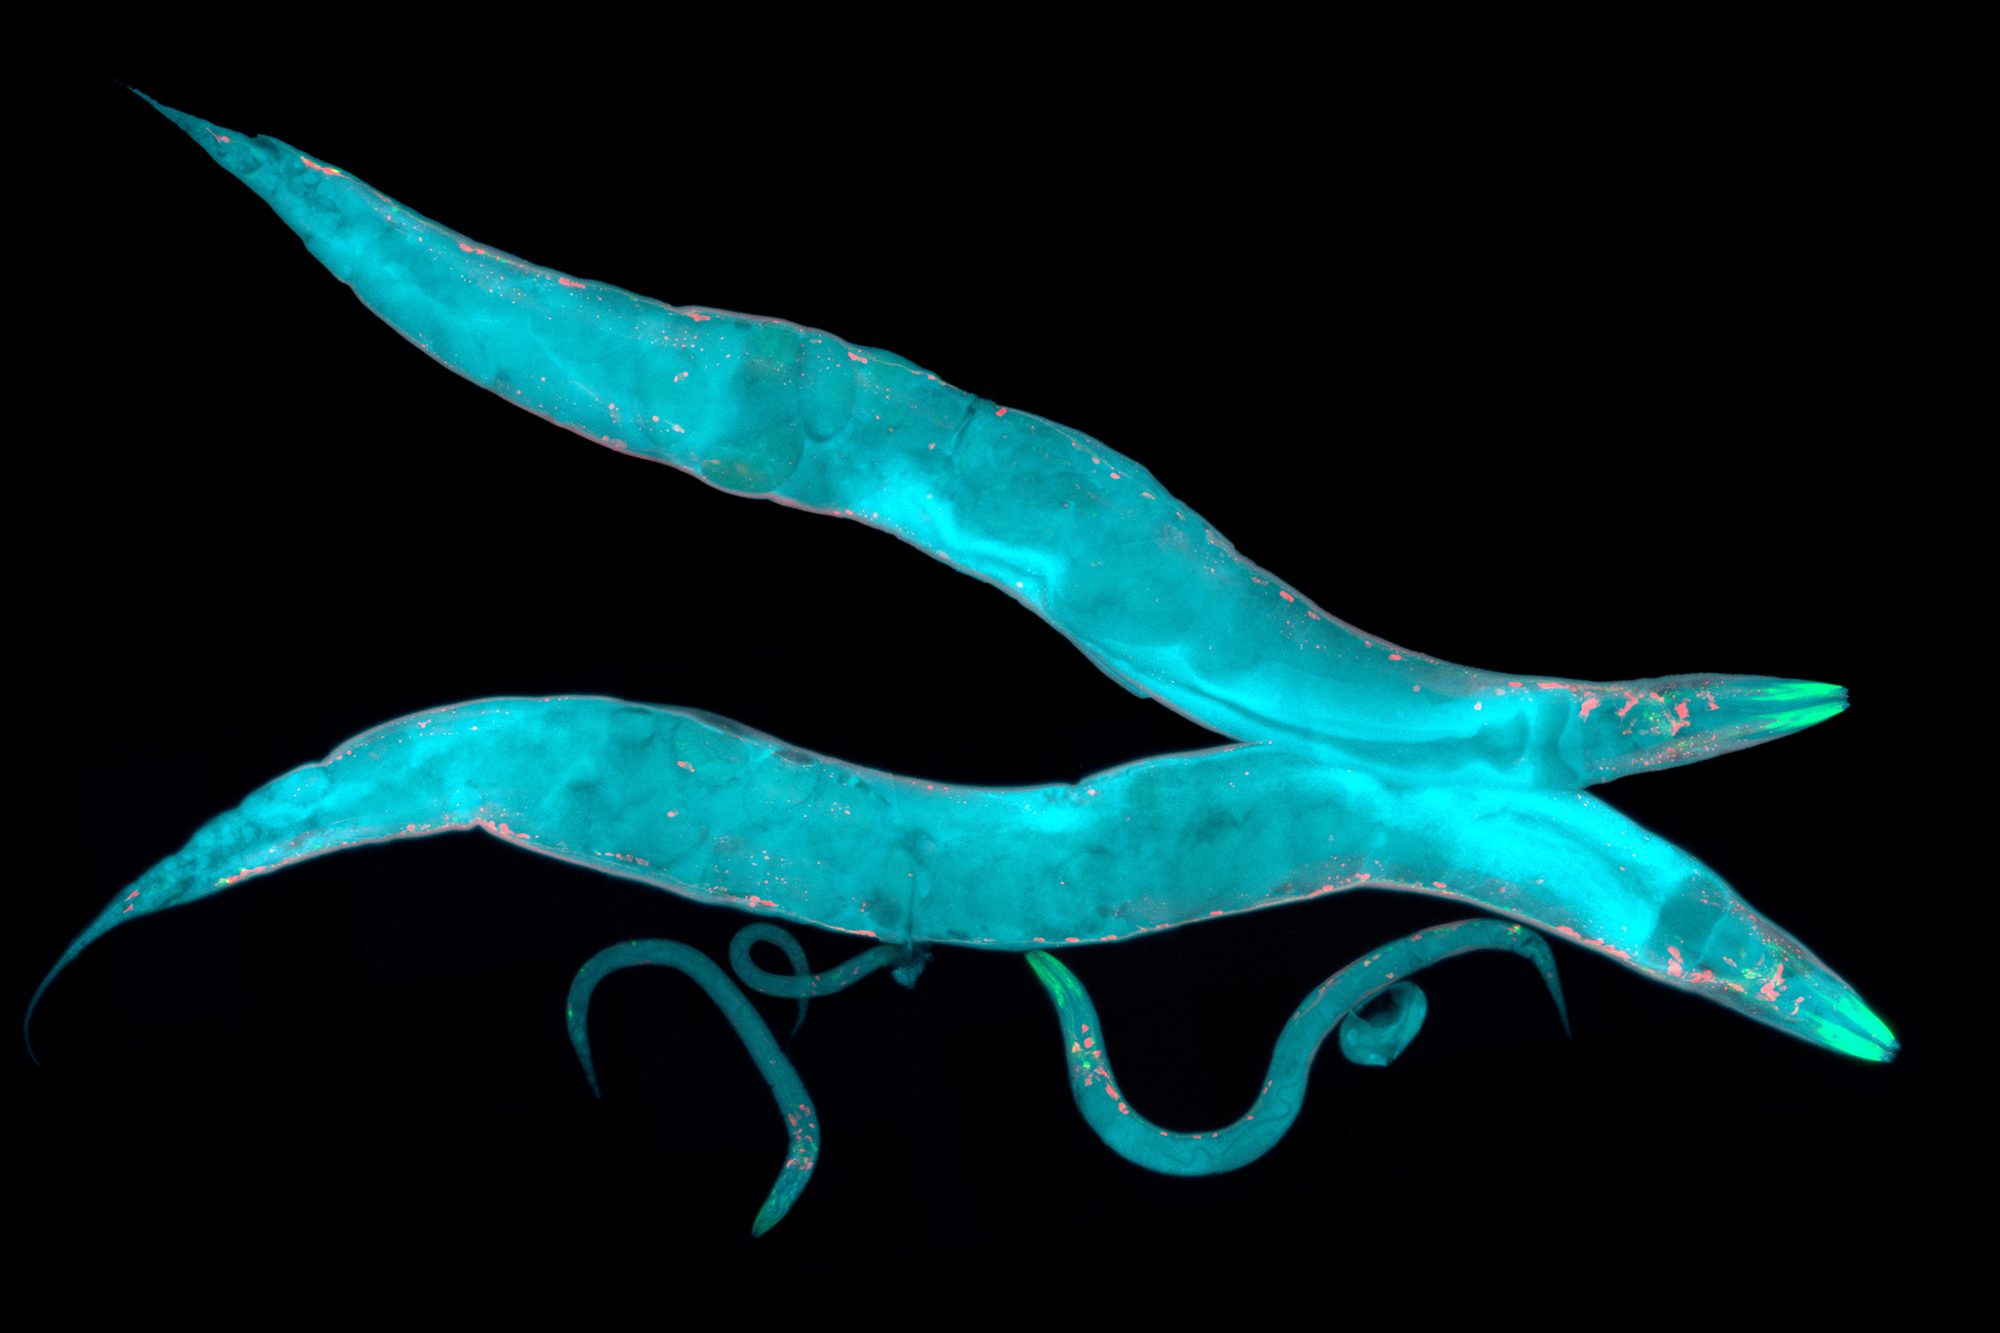 Micrsoscopic view of Caenorhabditis elegans, a free-living transparent nematode, about 1 mm in length